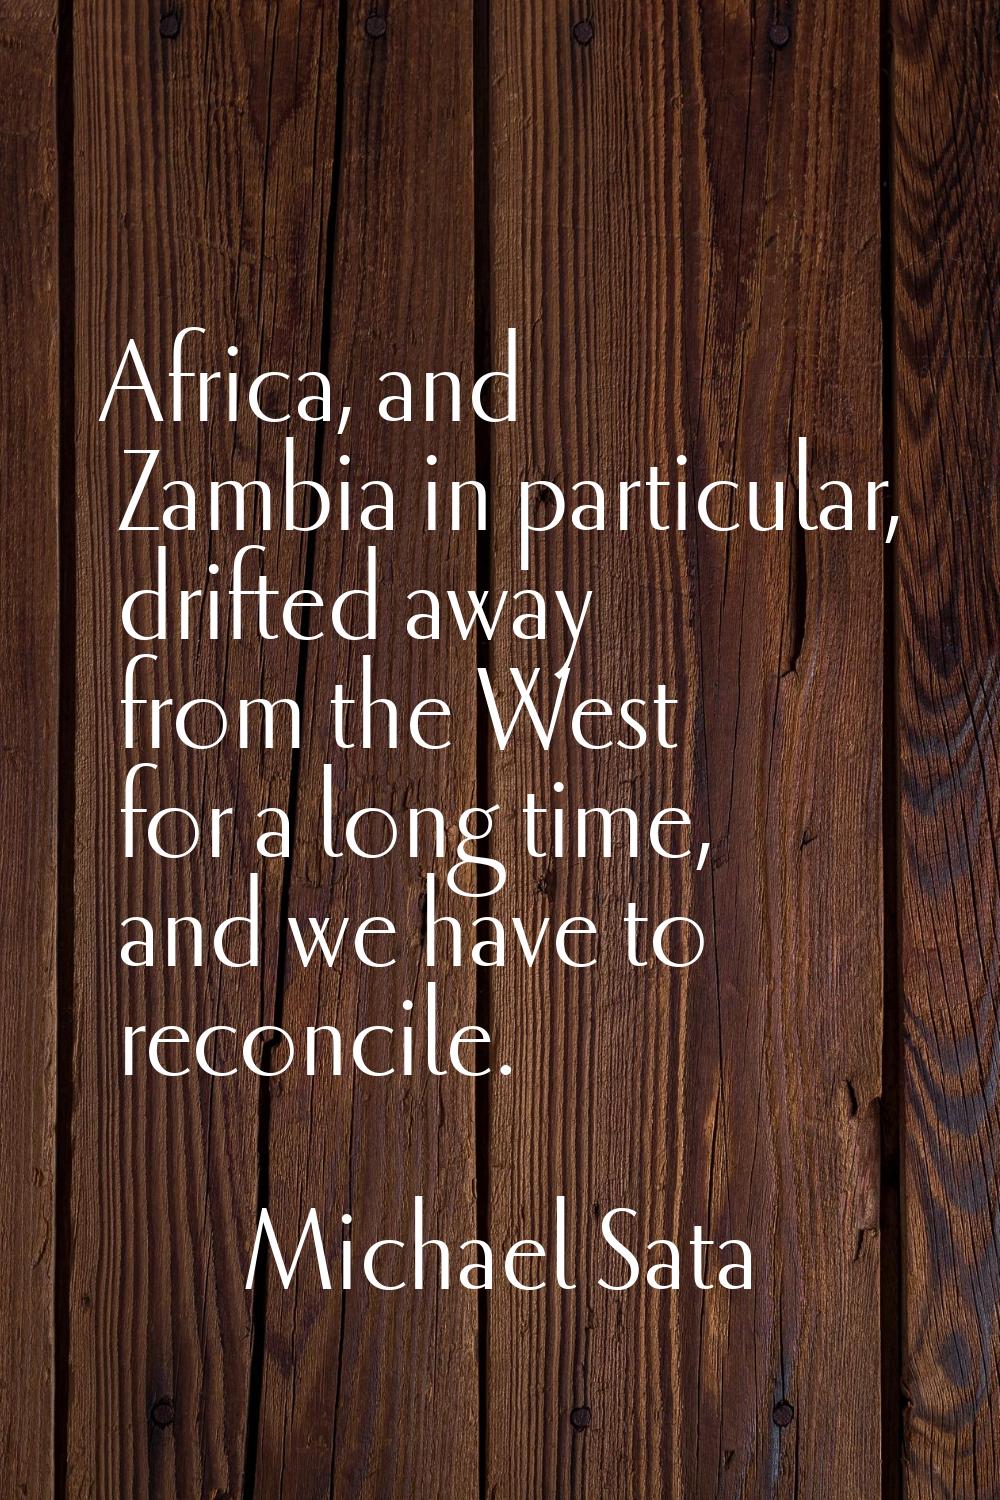 Africa, and Zambia in particular, drifted away from the West for a long time, and we have to reconc